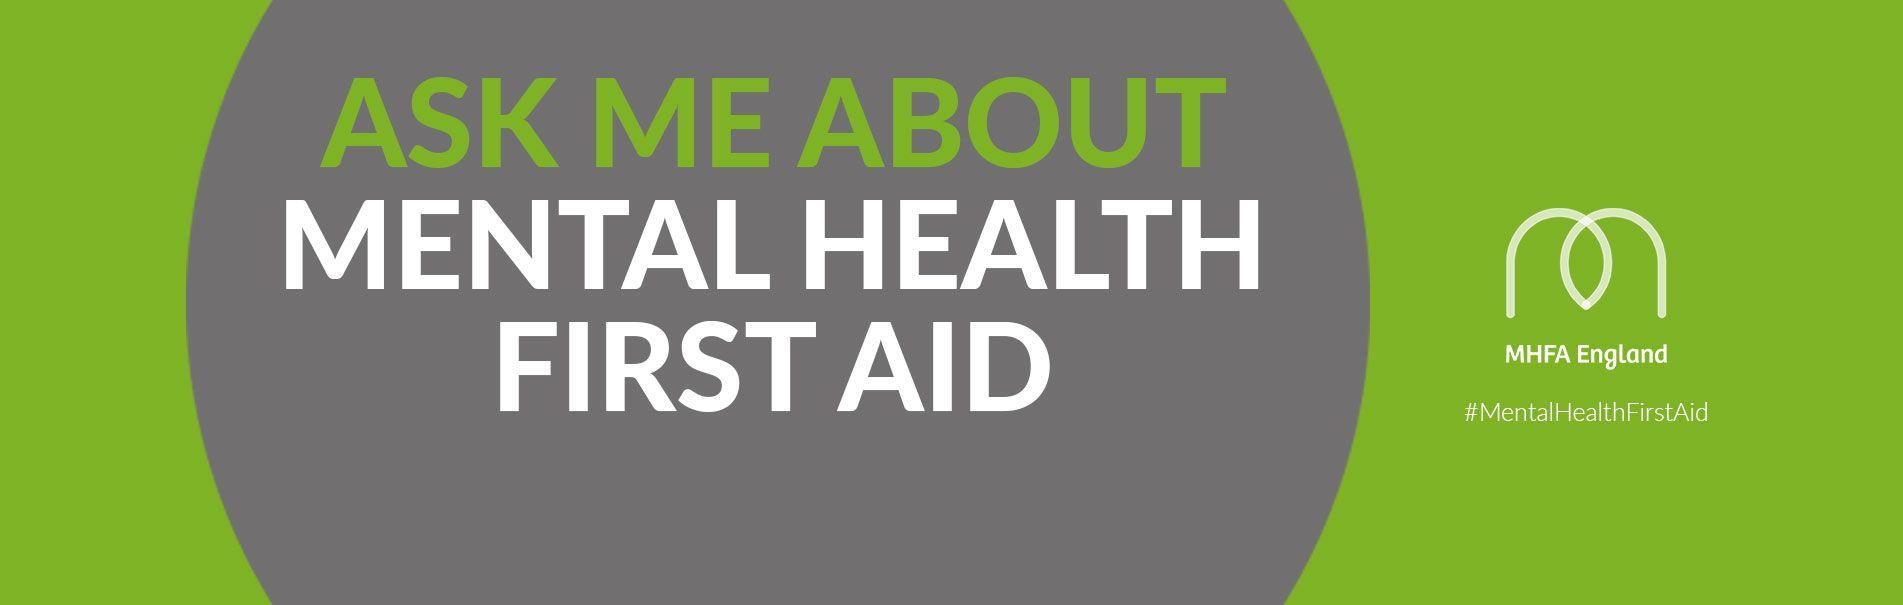 Mental Health First Aid Logo - About the Network Health First Contact Network